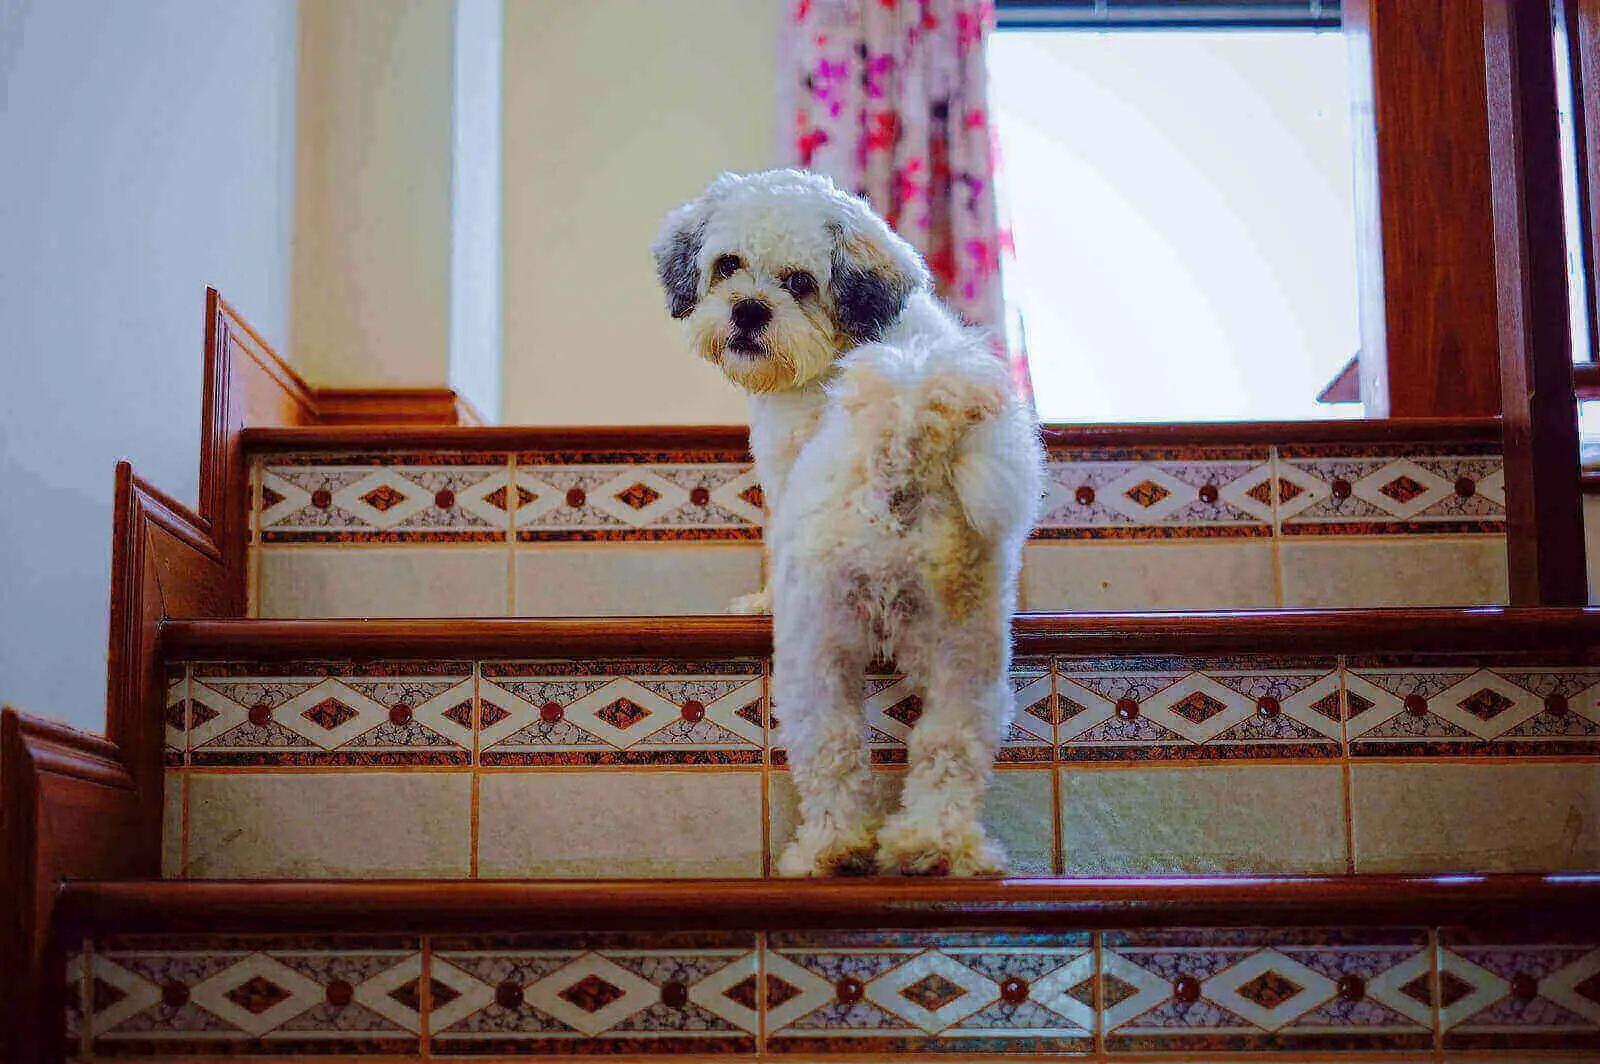 Dog Fell Down Stairs: 5 Smart Ways To Stop Dog Falling Down Stairs